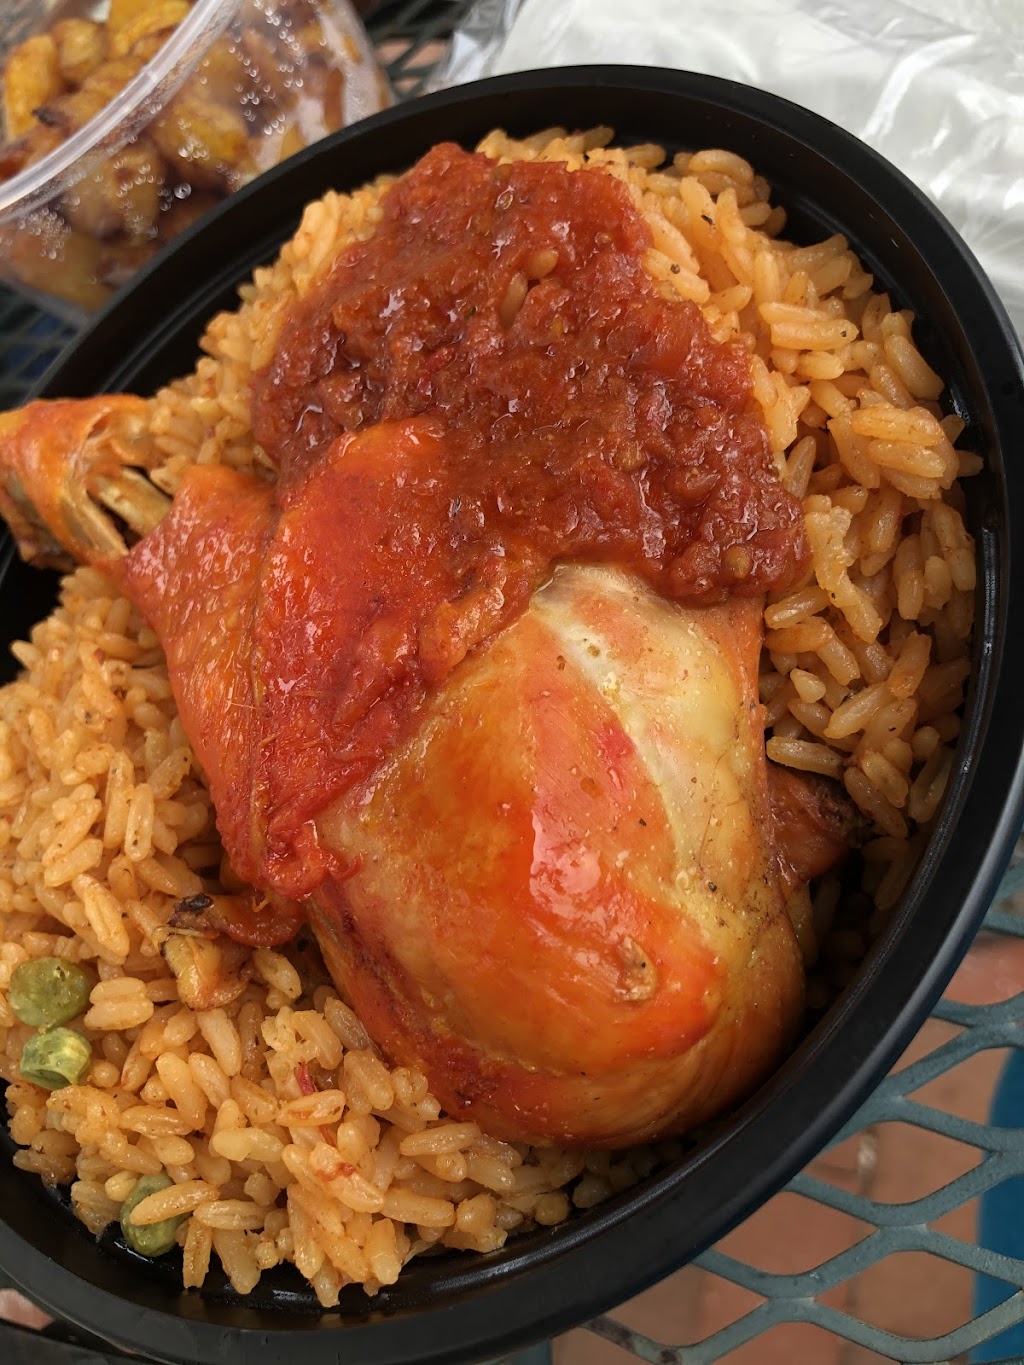 Duro West African Cuisine | 9 College St, South Hadley, MA 01075 | Phone: (413) 322-0687